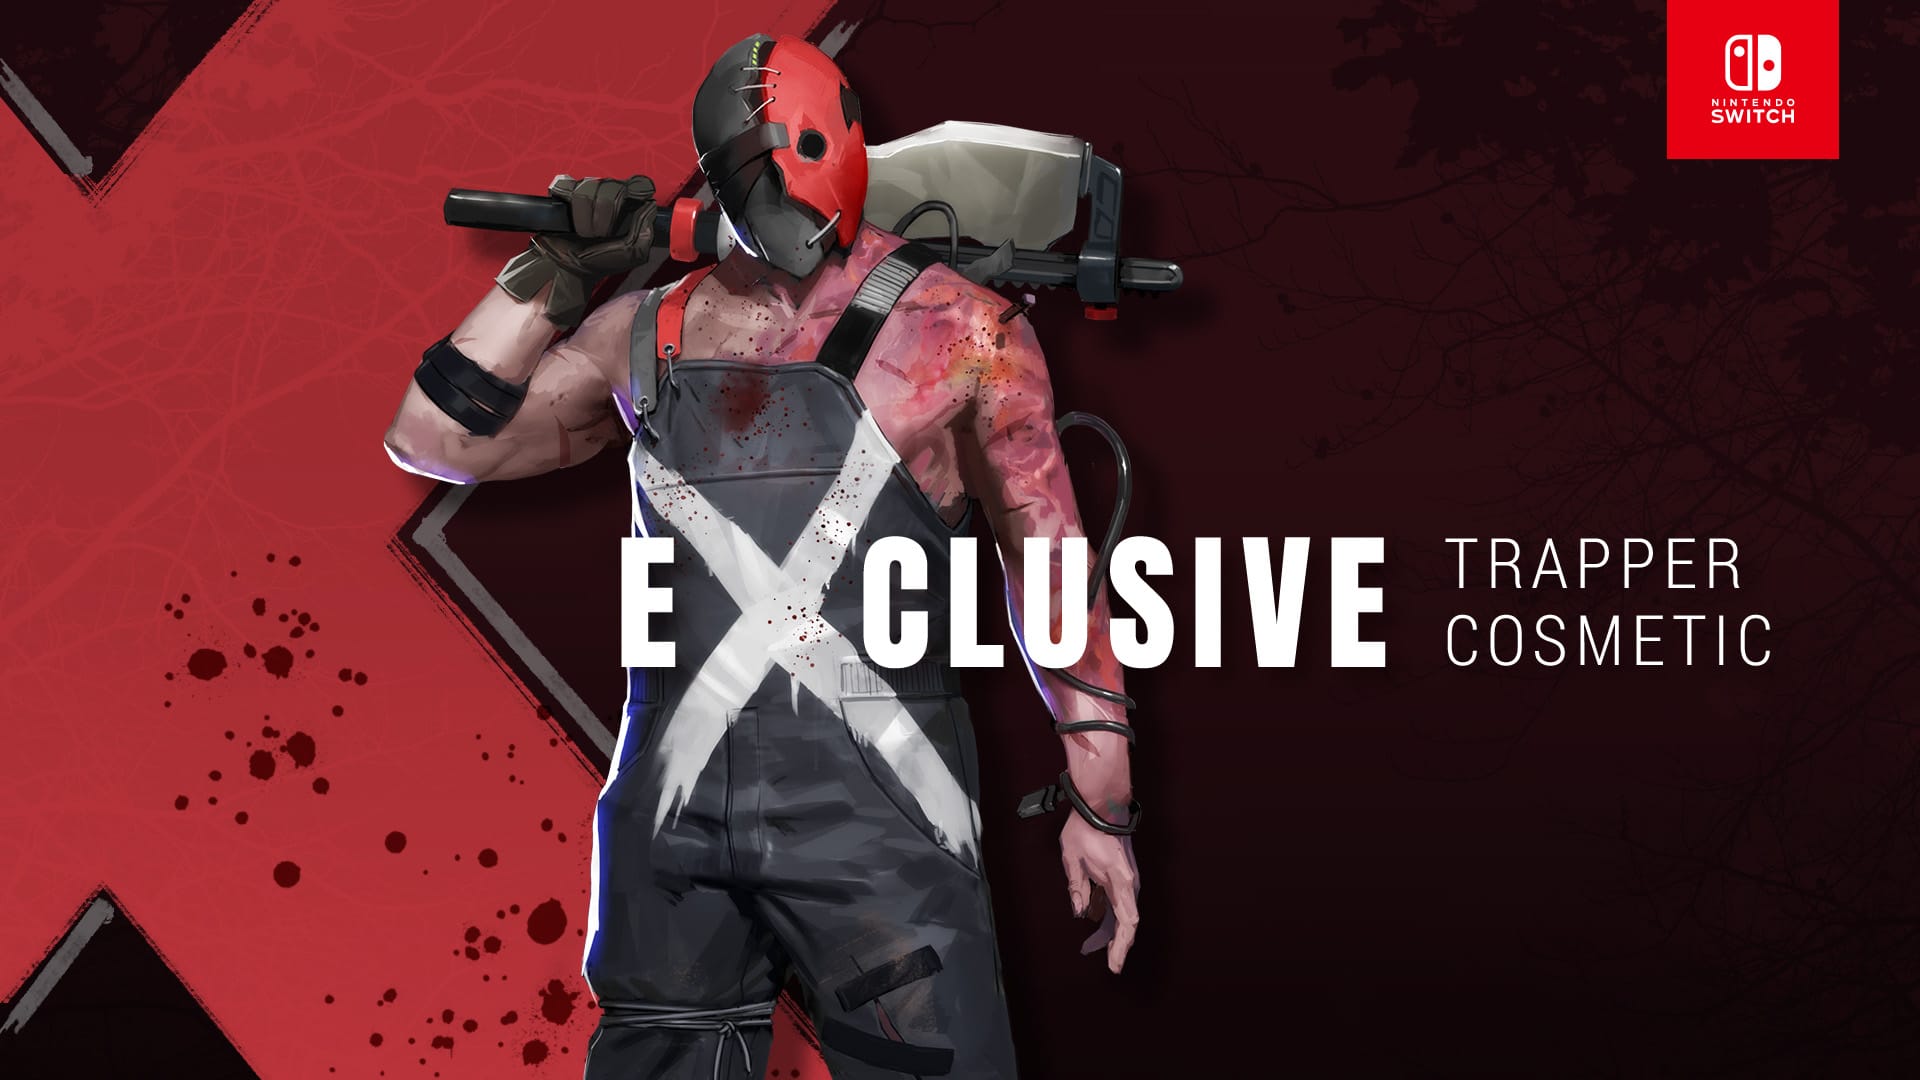 Dead by Daylight - Exclusive Switch Cosmetic, Nintendo Switch, GamersRD